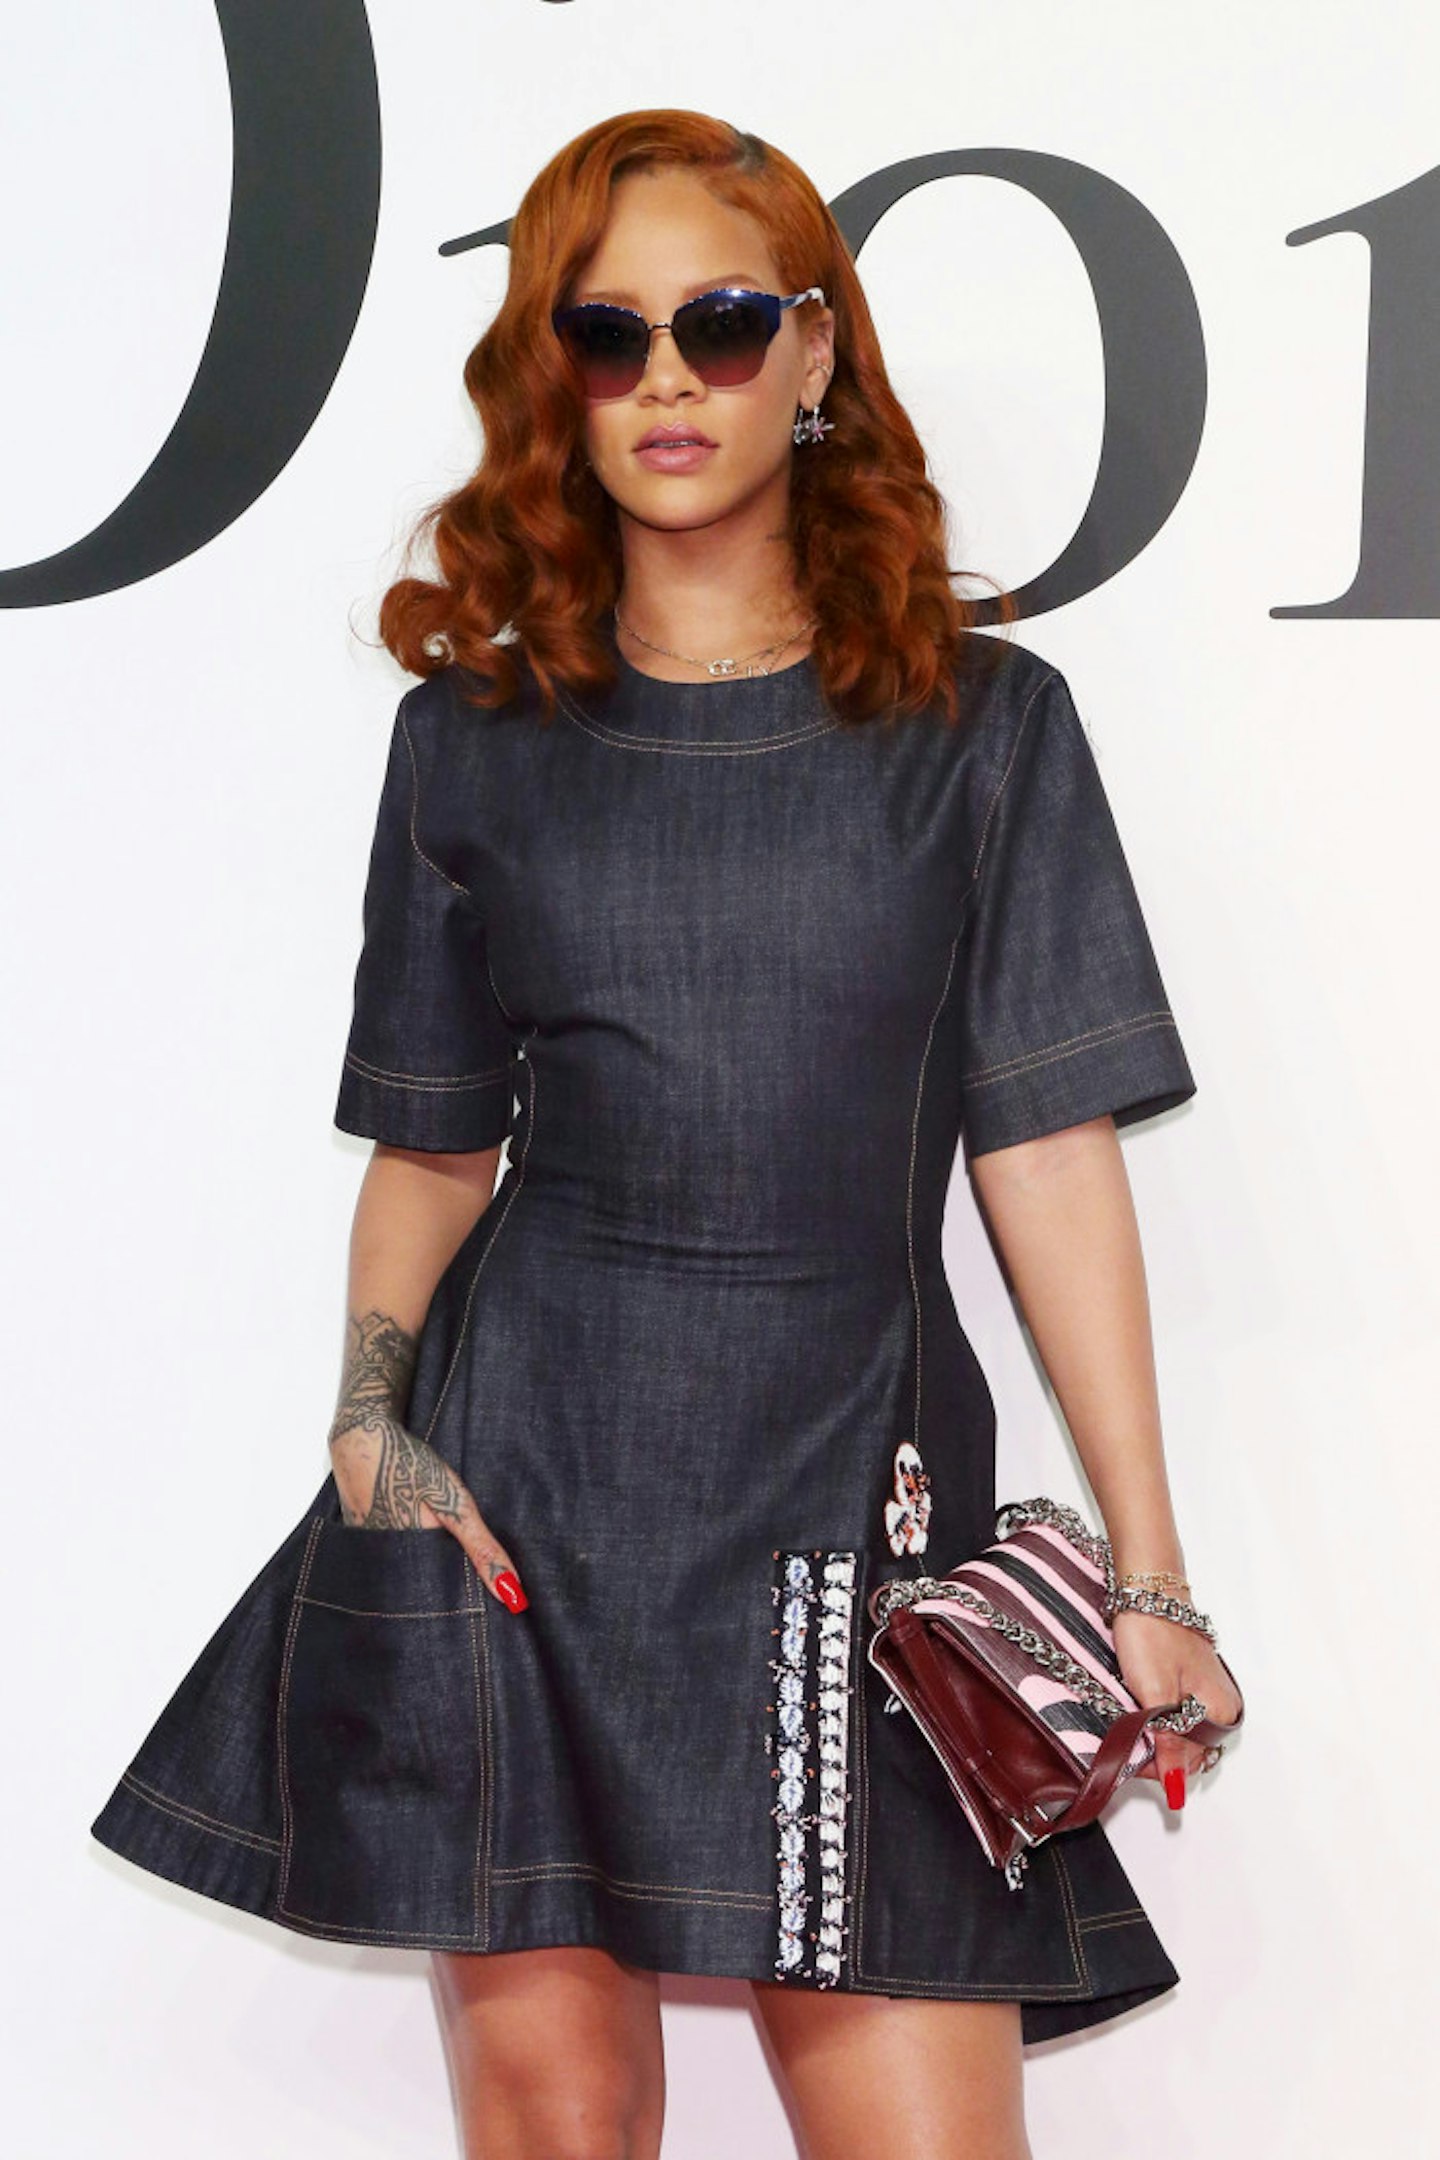 All of Rihanna's ground-breaking pregnancy looks